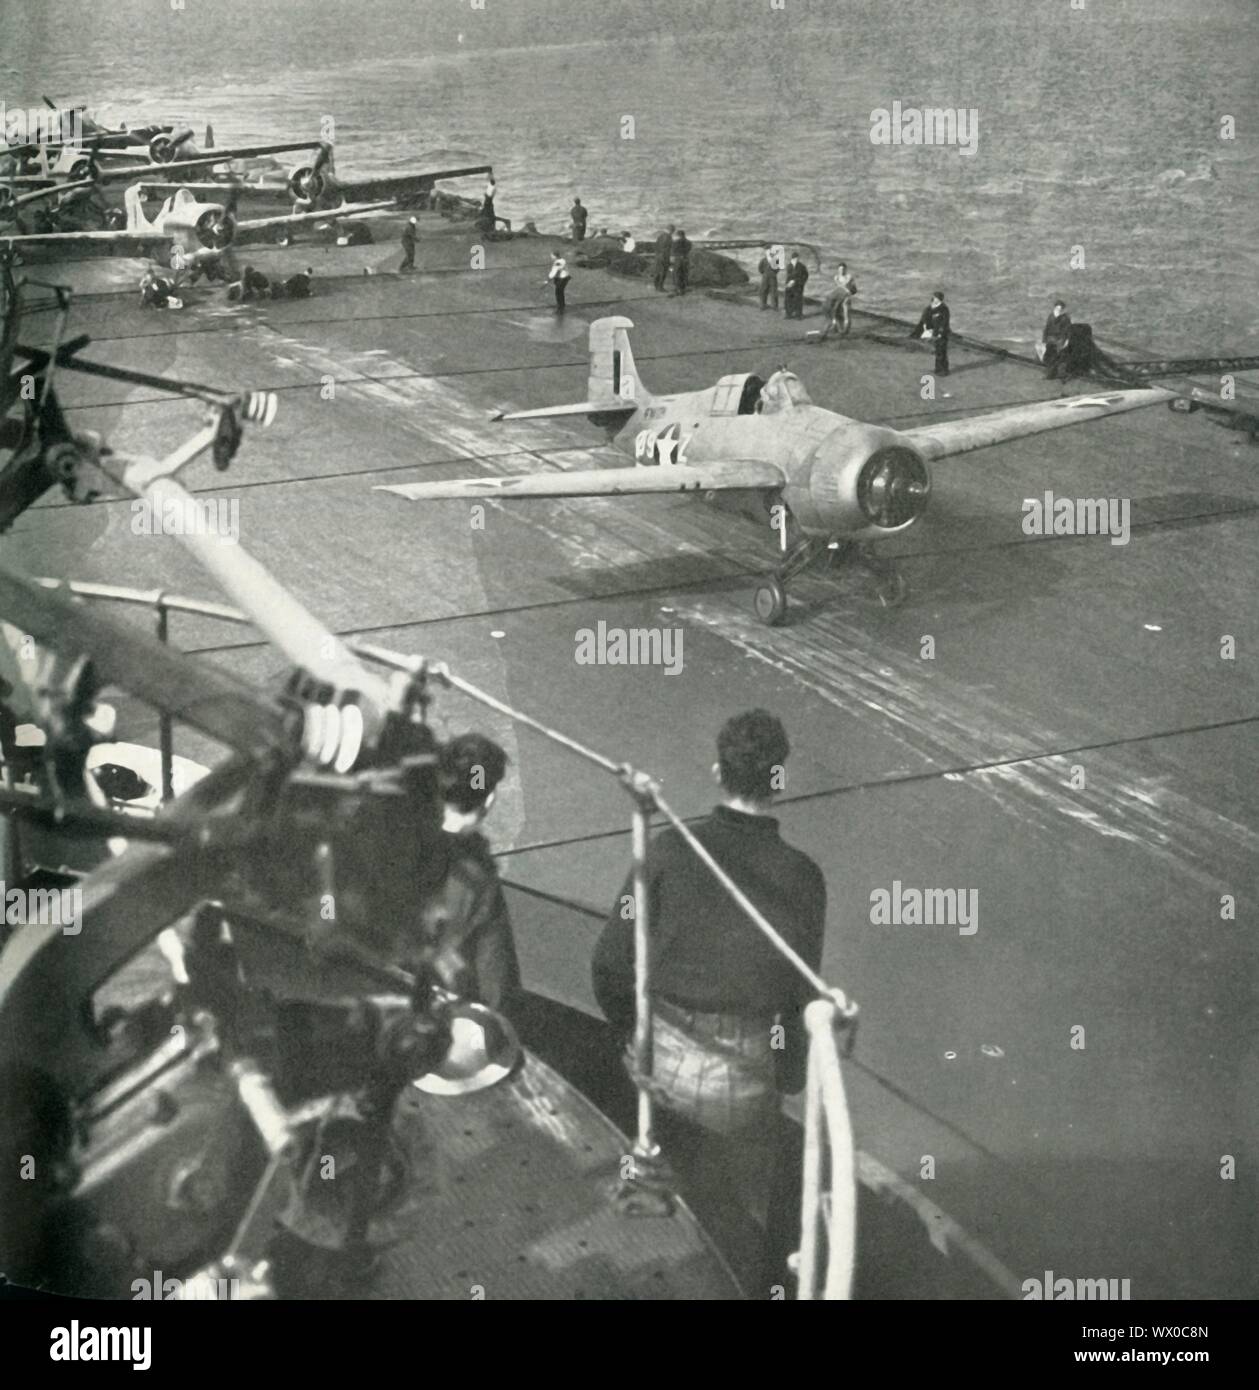 Fighter planes on board an aircraft carrier, Second World War, c1943. 'A Martlet [Grumman F4F Wildcat] of the Fleet Air Arm, bearing American markings, flies off a British carrier during the African operations, while other Martlets and Seafires are ready to follow. The Fleet Air Arm protected the [Royal Navy] Fleet and transports, covered the landings, and supported the advance.' The FAA is the section of the Royal Navy responsible for the operation of naval aircraft. From &quot;Fleet Air Arm&quot;. [His Majesty's Stationery Office, London, 1943] Stock Photo